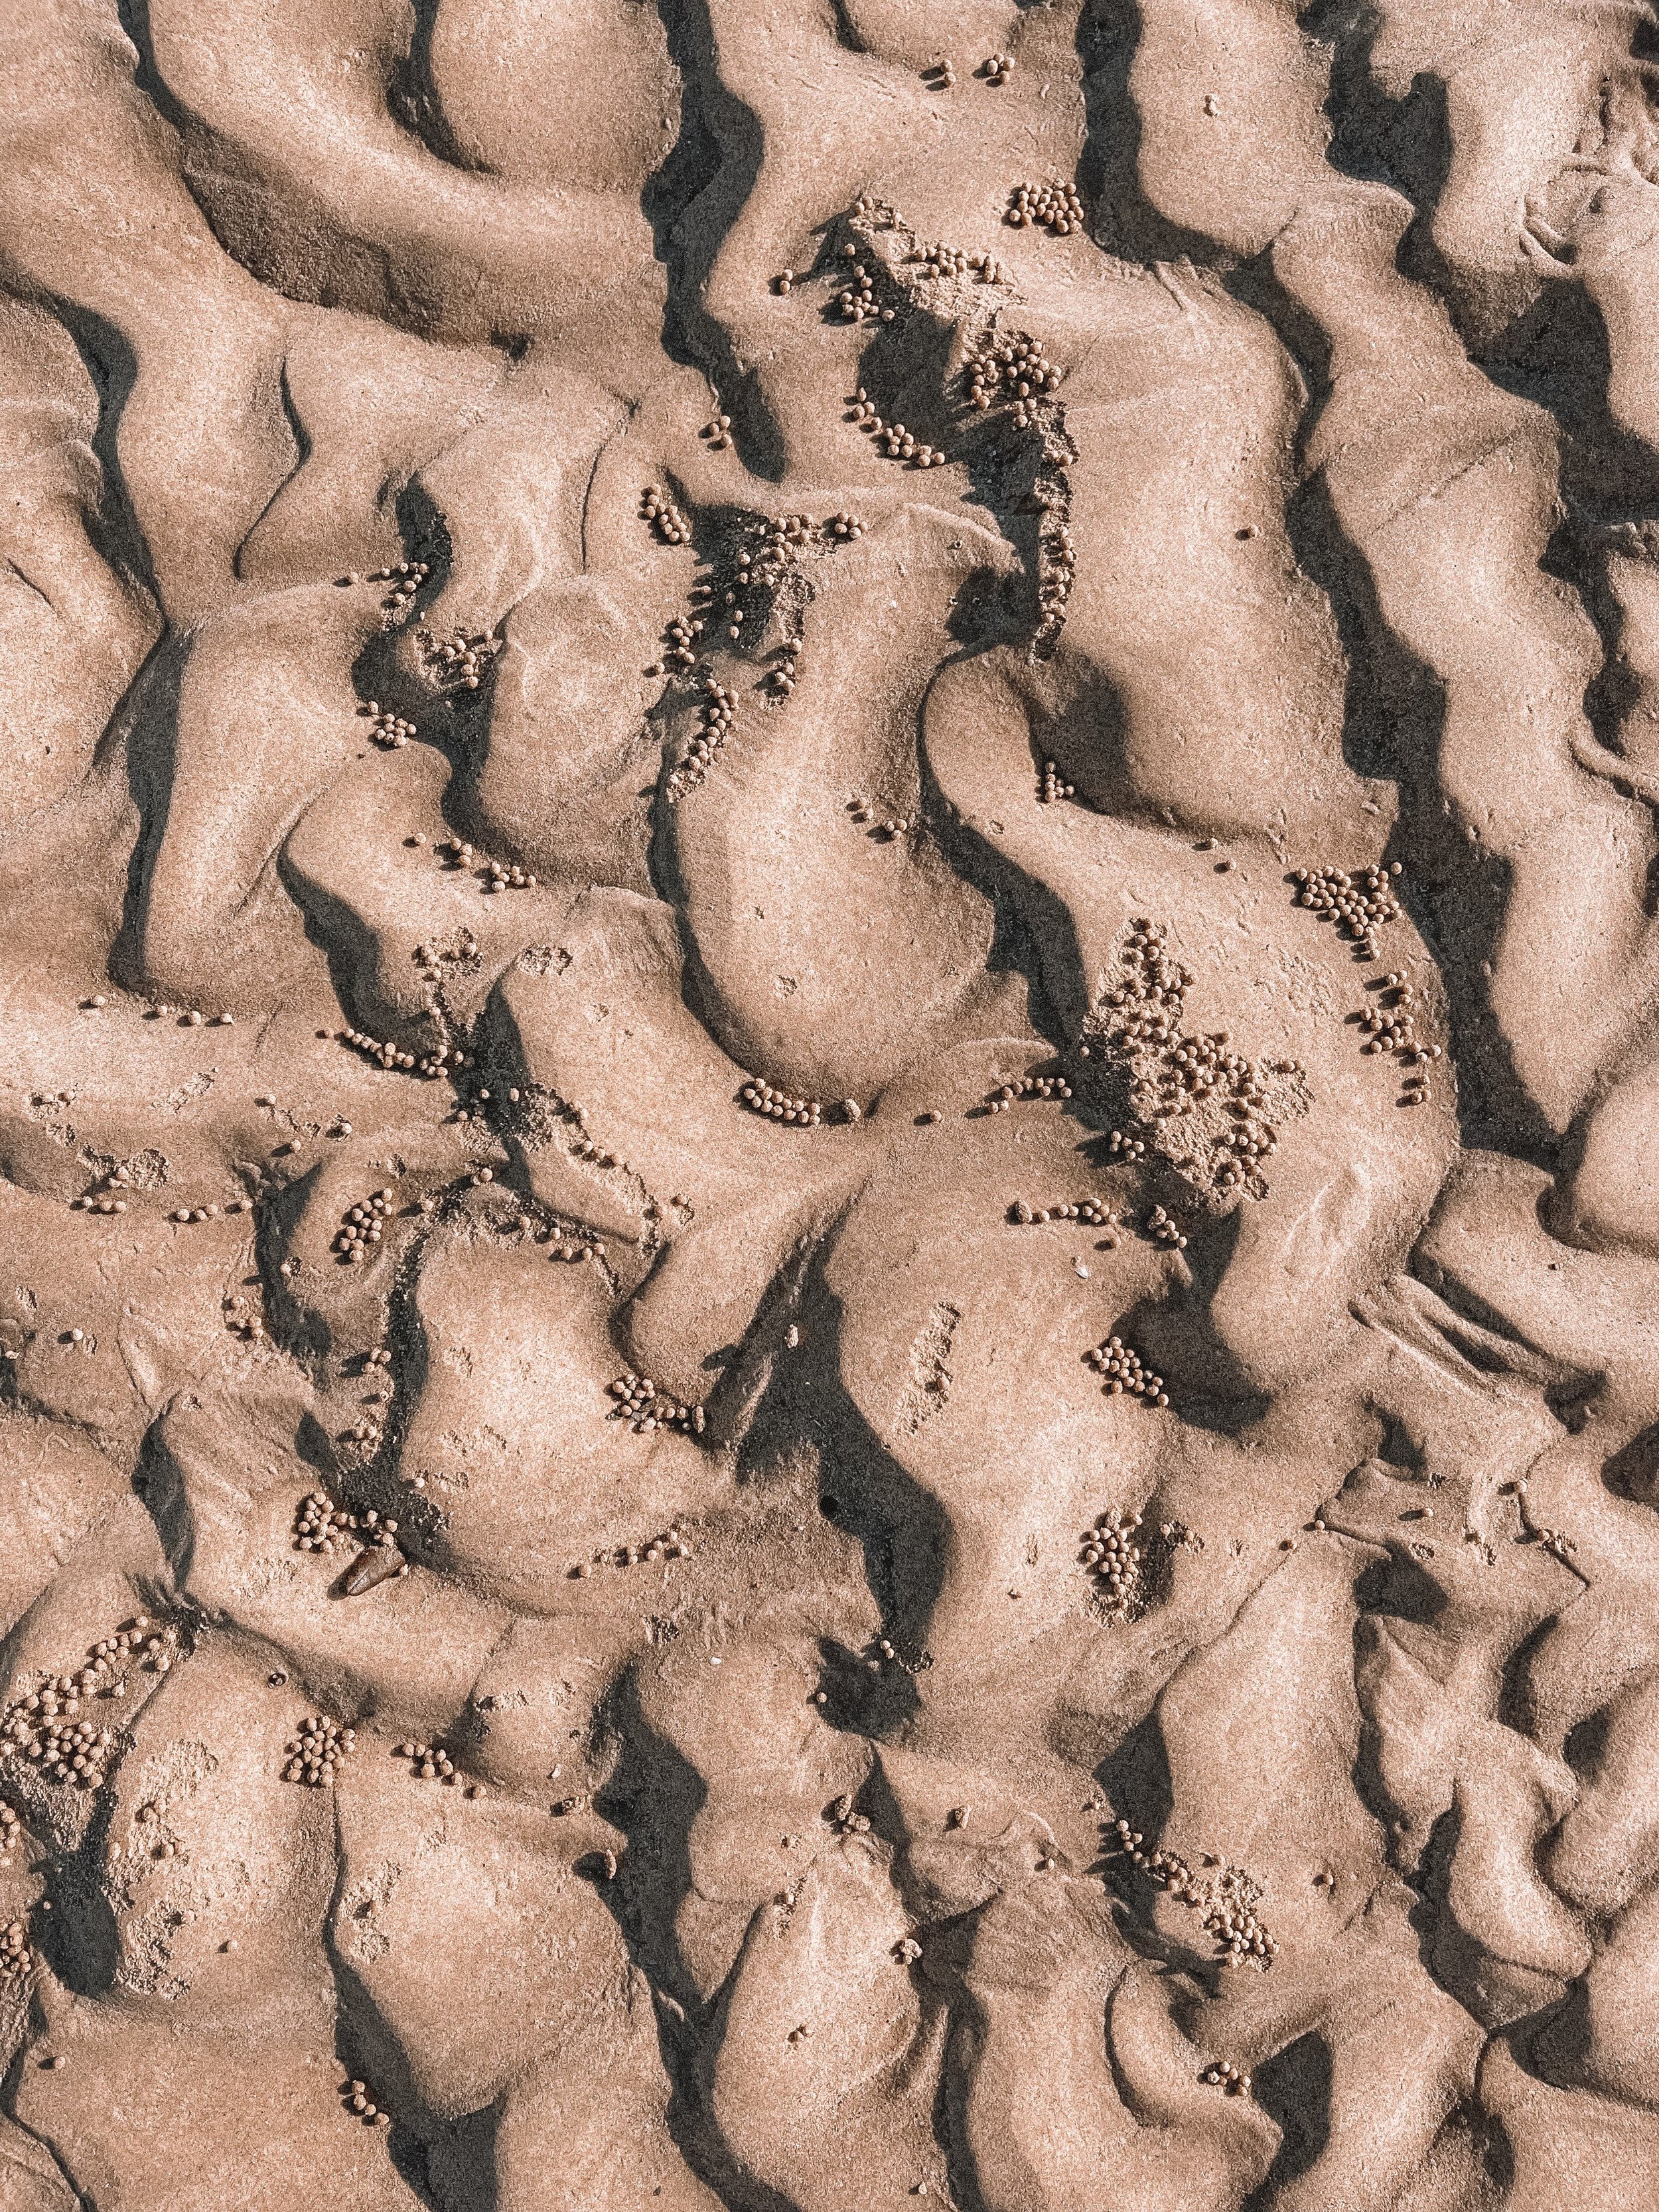 Sand shapes - Hat Head - New South Wales (NSW) - Australia